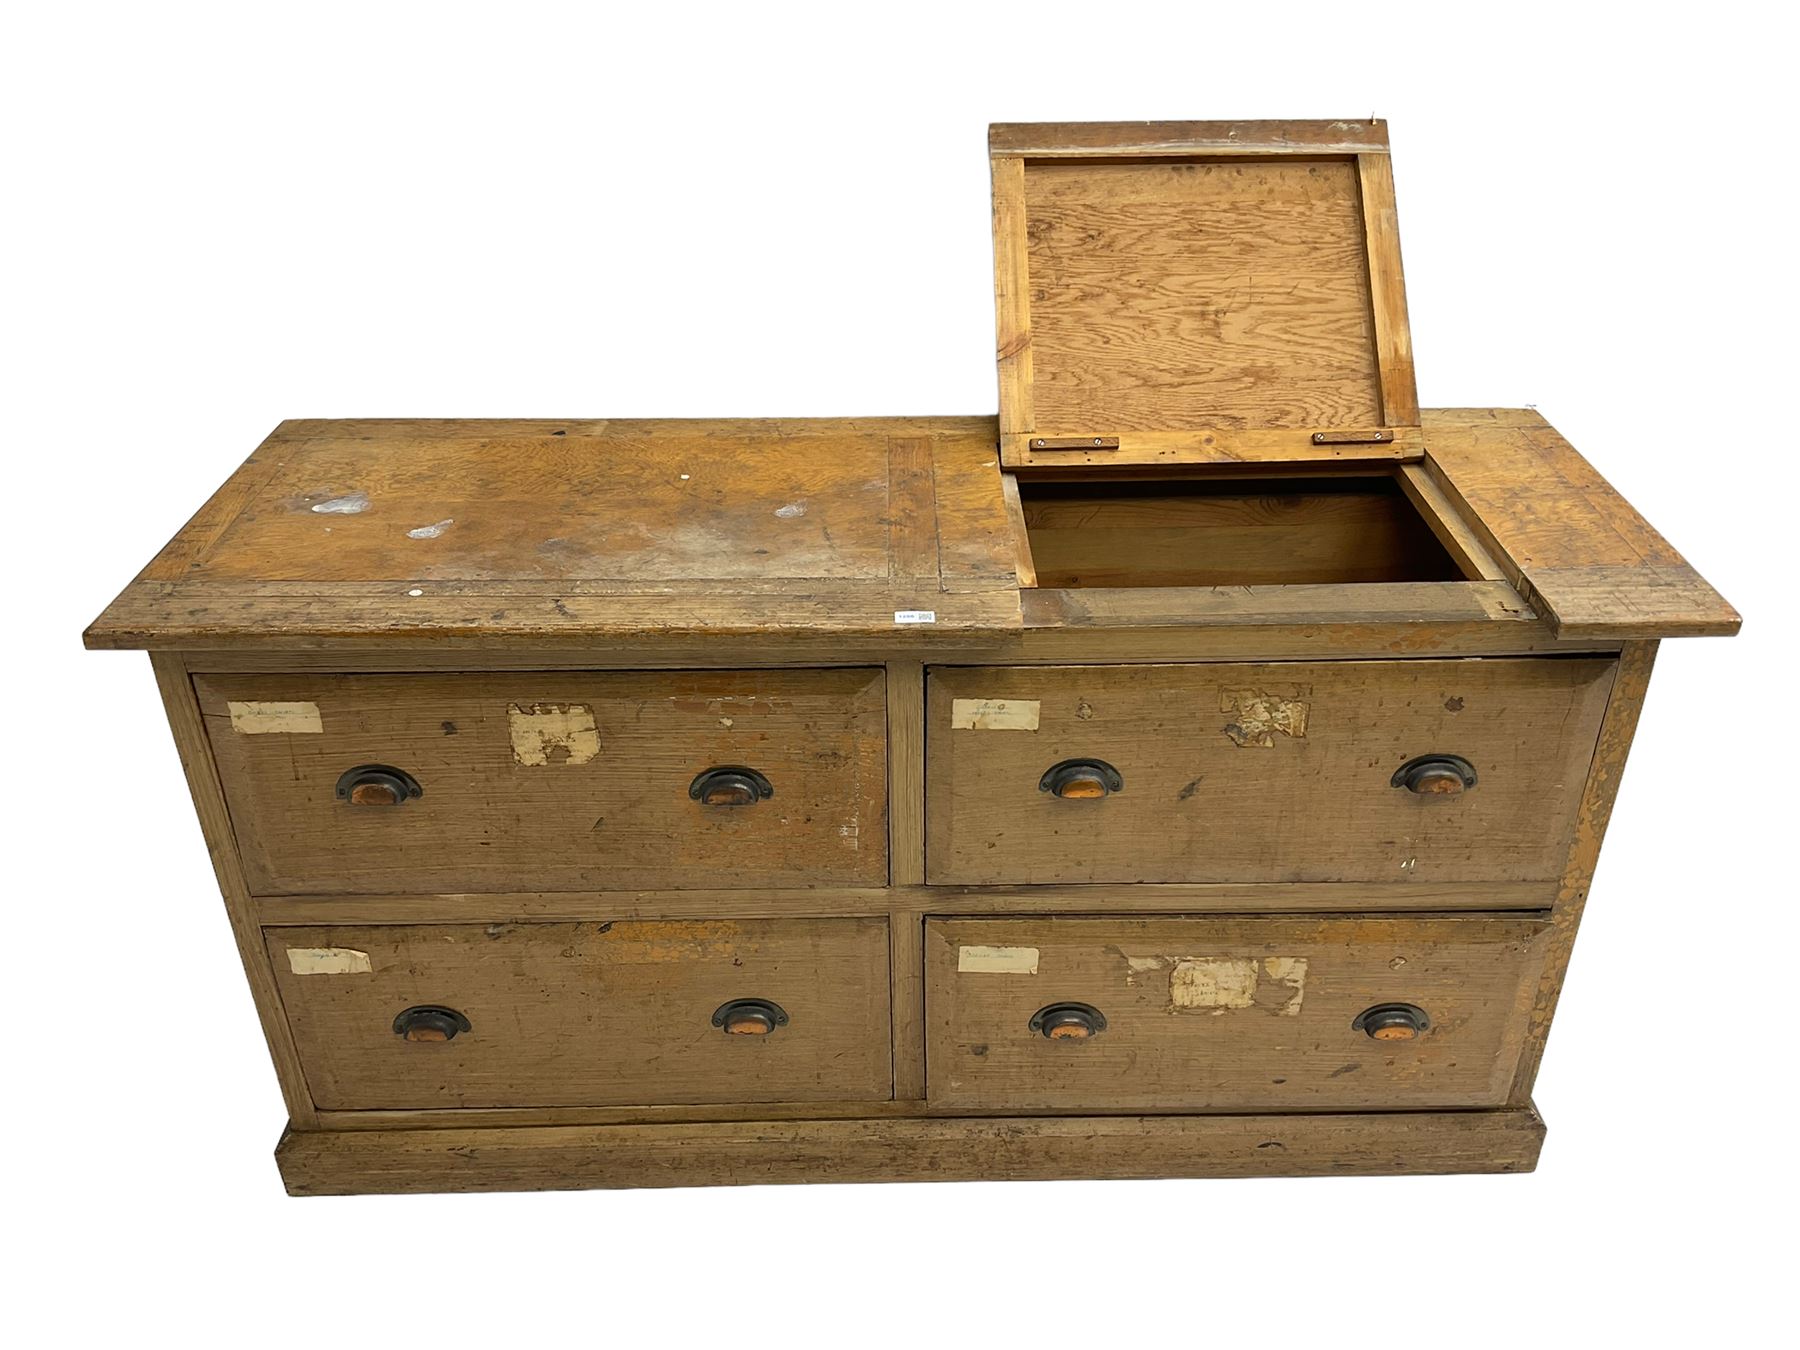 19th century rustic pine chest - Image 4 of 5